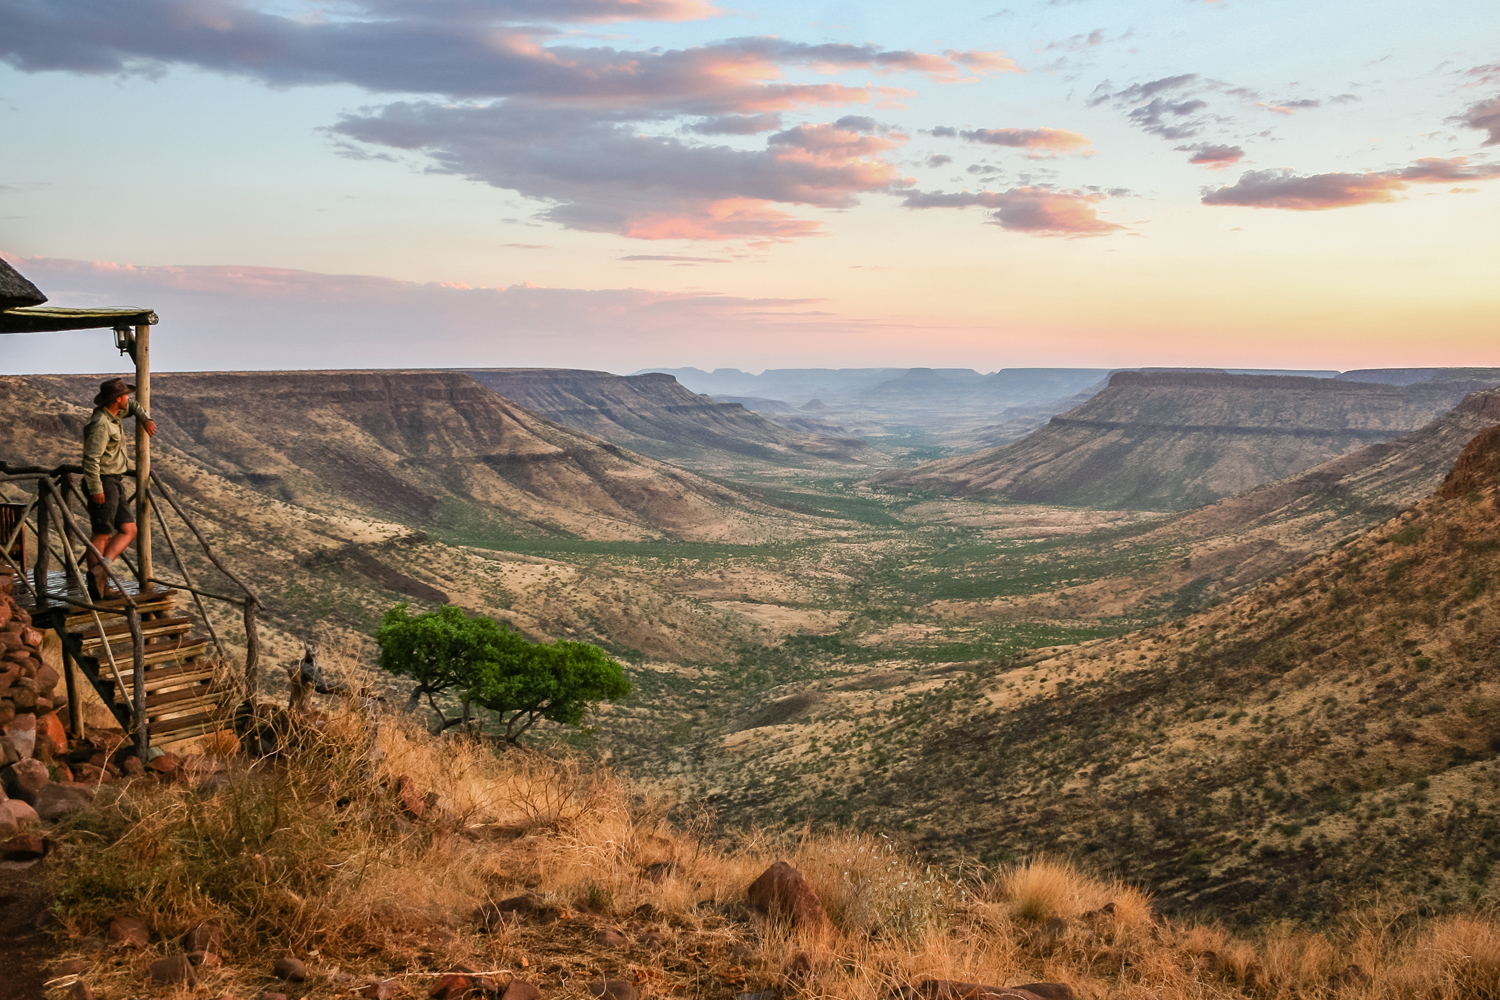 The Klip River valley as seen from Damaraland’s Grootberg plateau